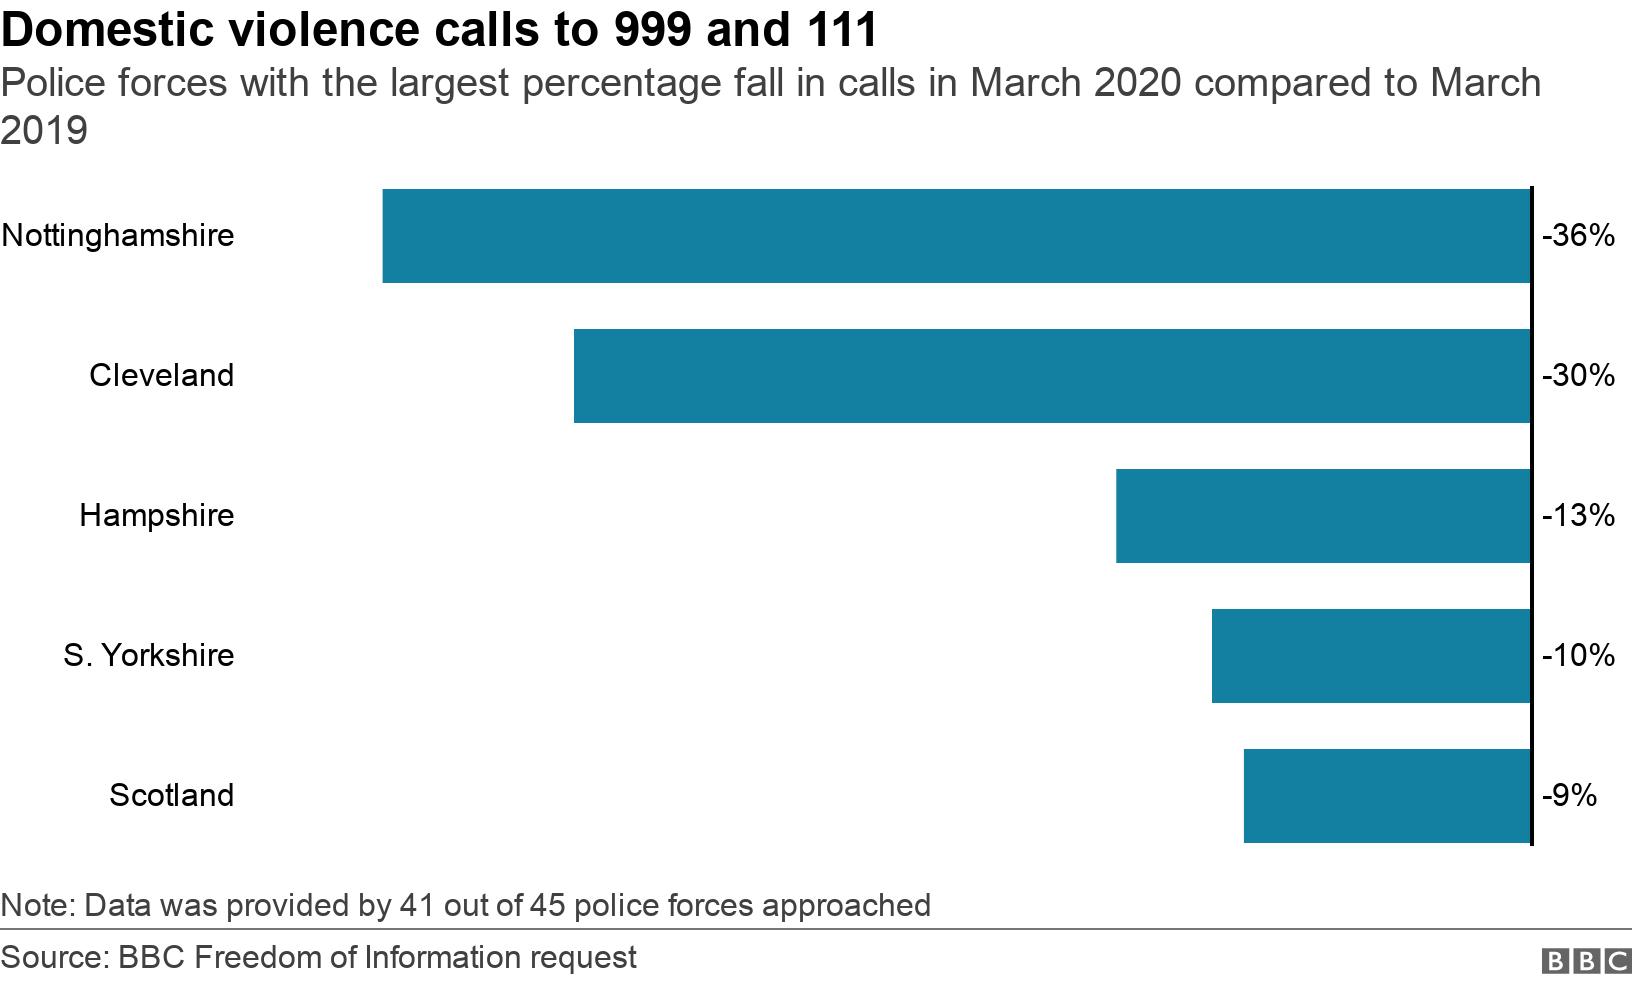 Domestic violence calls to 999 and 111. Police forces with the largest percentage fall in calls in March 2020 compared to March 2019.  Note: Data was provided by 41 out of 45 police forces approached.